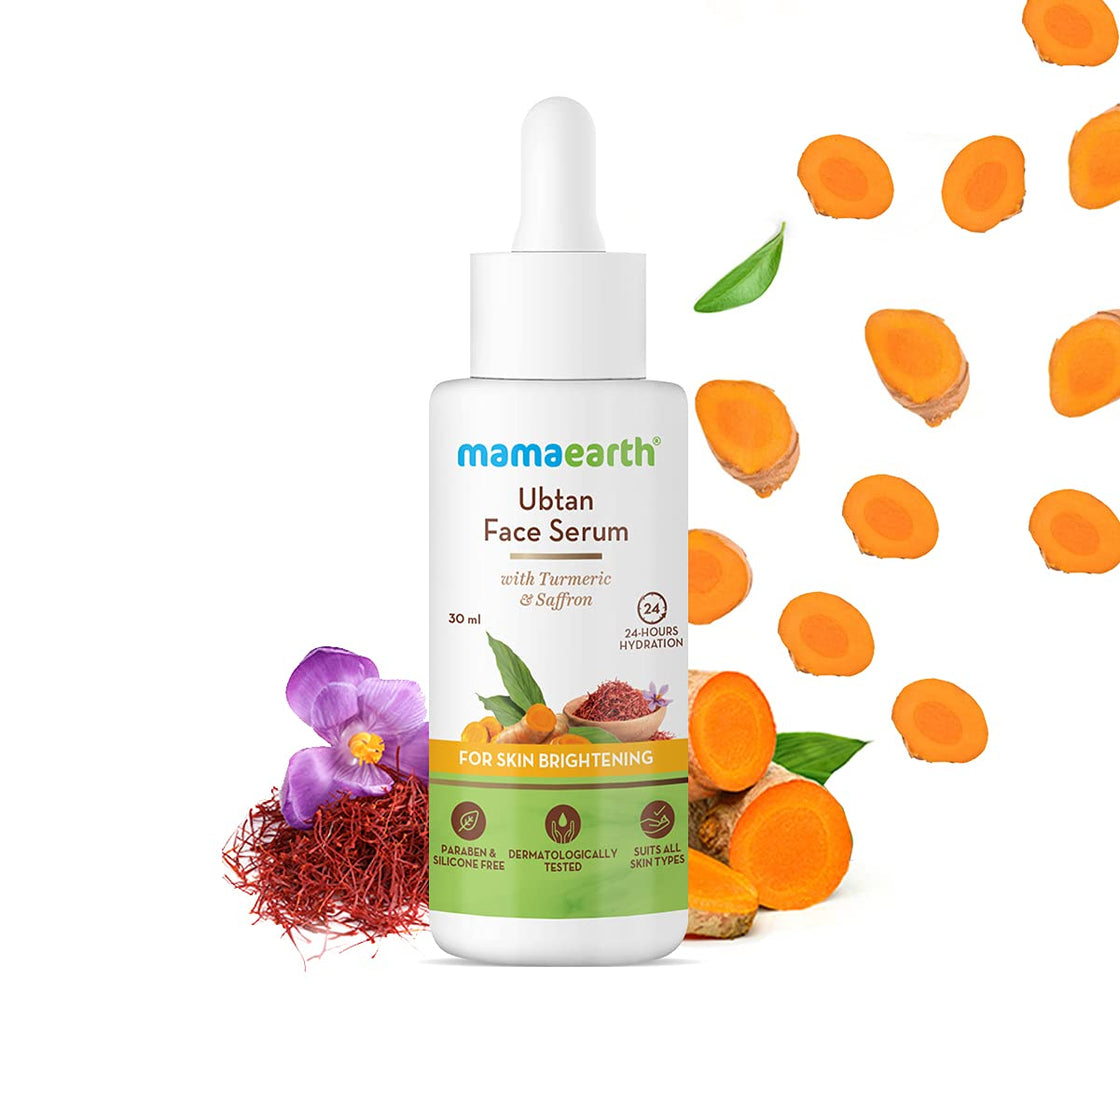 Mamaearth Ubtan Face Serum For Glowing Skin, With Turmeric & Saffron For Skin Brightening